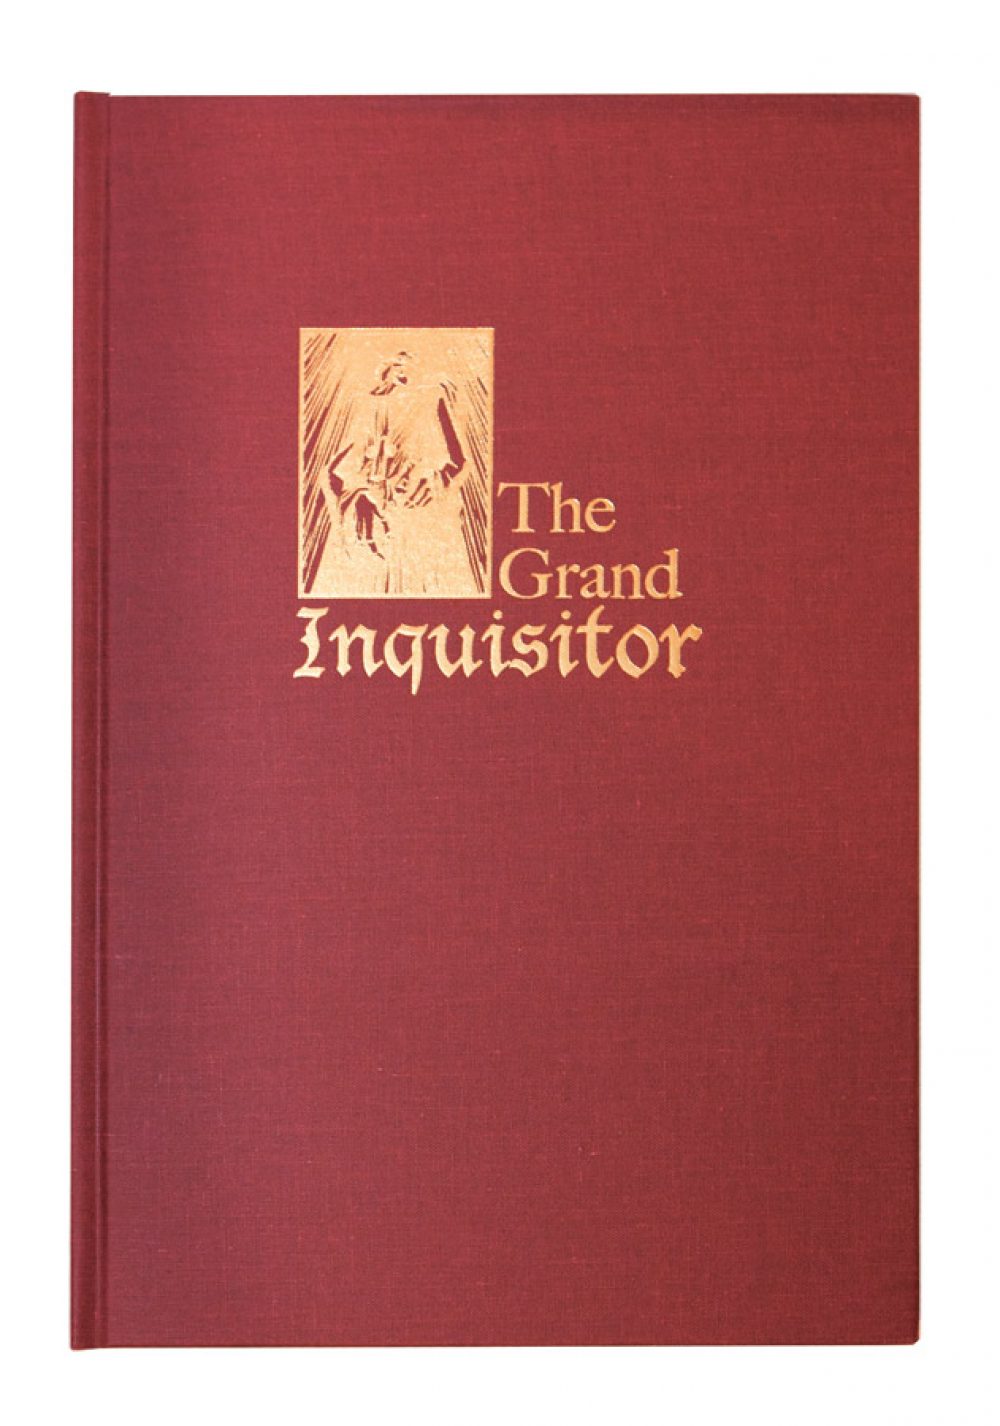 The Grand Inquisitor by Fyodor Dostoevsky